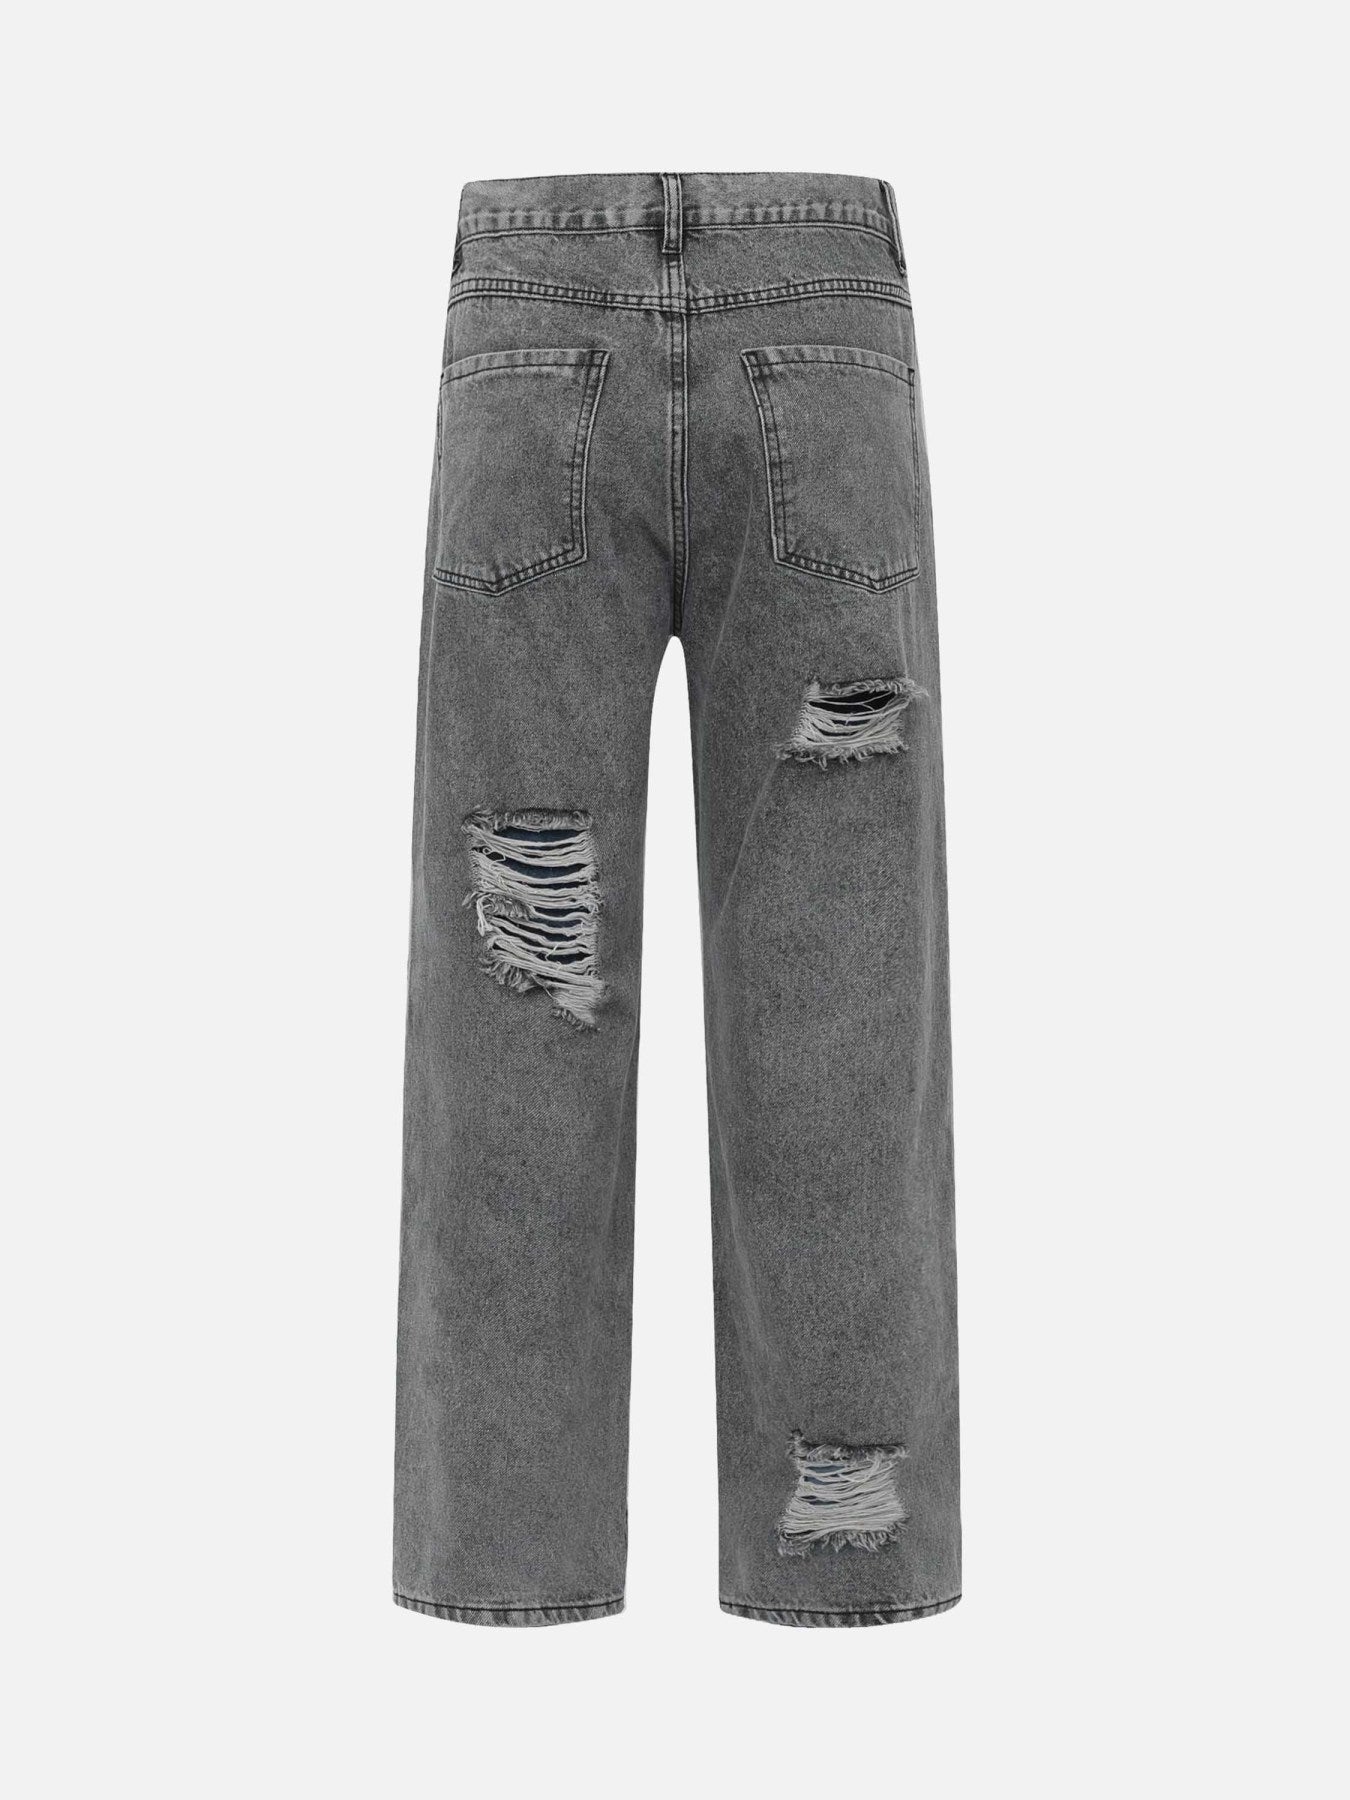 The Supermade Washed And Patched Ripped Jeans